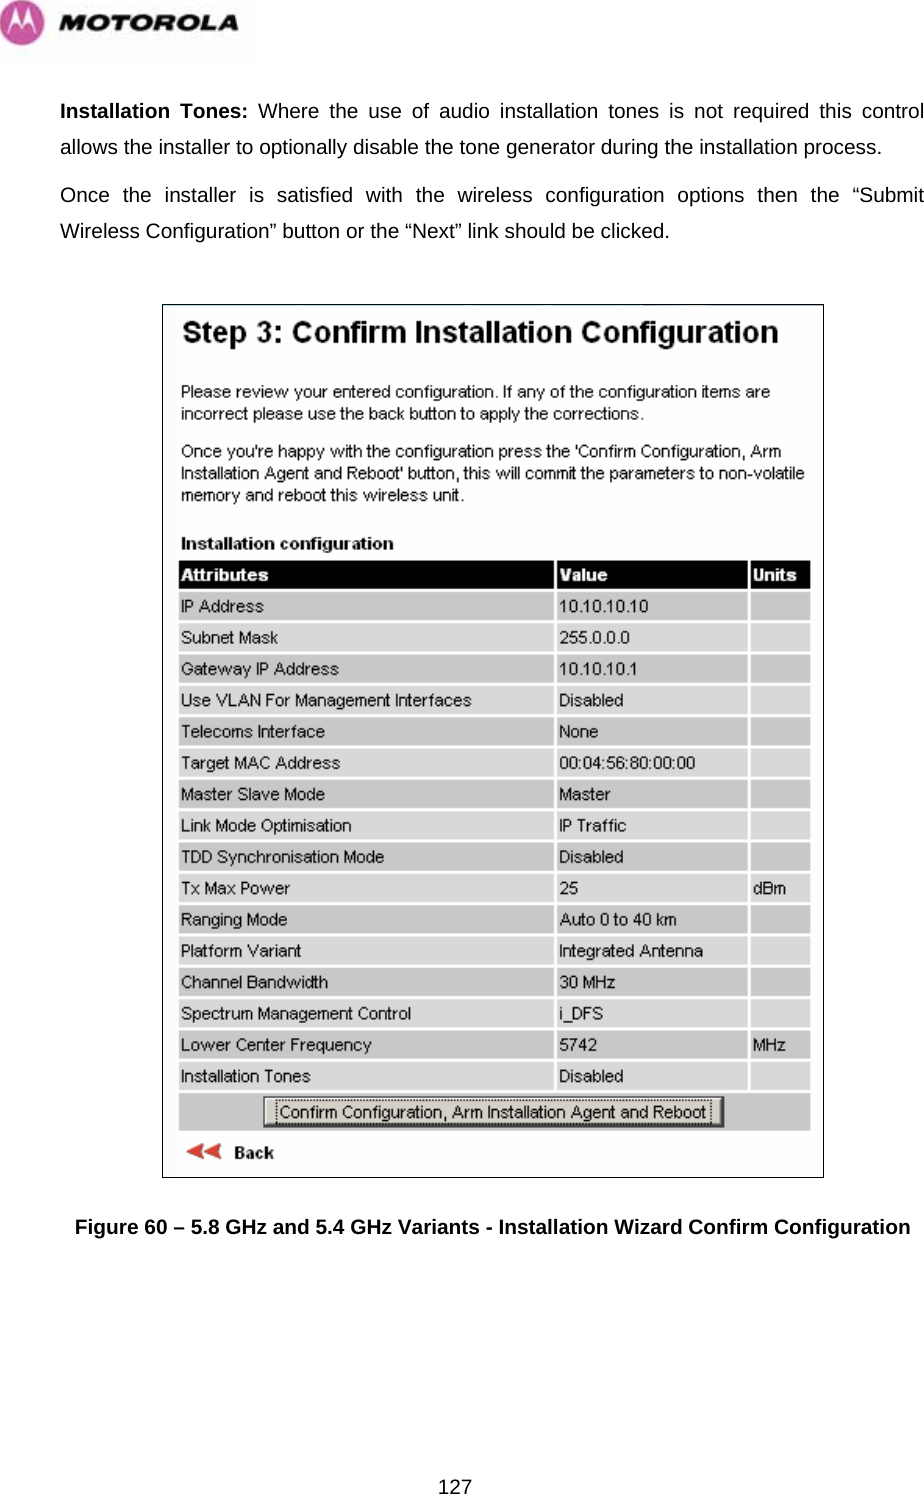   127Installation Tones: Where the use of audio installation tones is not required this control allows the installer to optionally disable the tone generator during the installation process. Once the installer is satisfied with the wireless configuration options then the “Submit Wireless Configuration” button or the “Next” link should be clicked.   Figure 60 – 5.8 GHz and 5.4 GHz Variants - Installation Wizard Confirm Configuration  